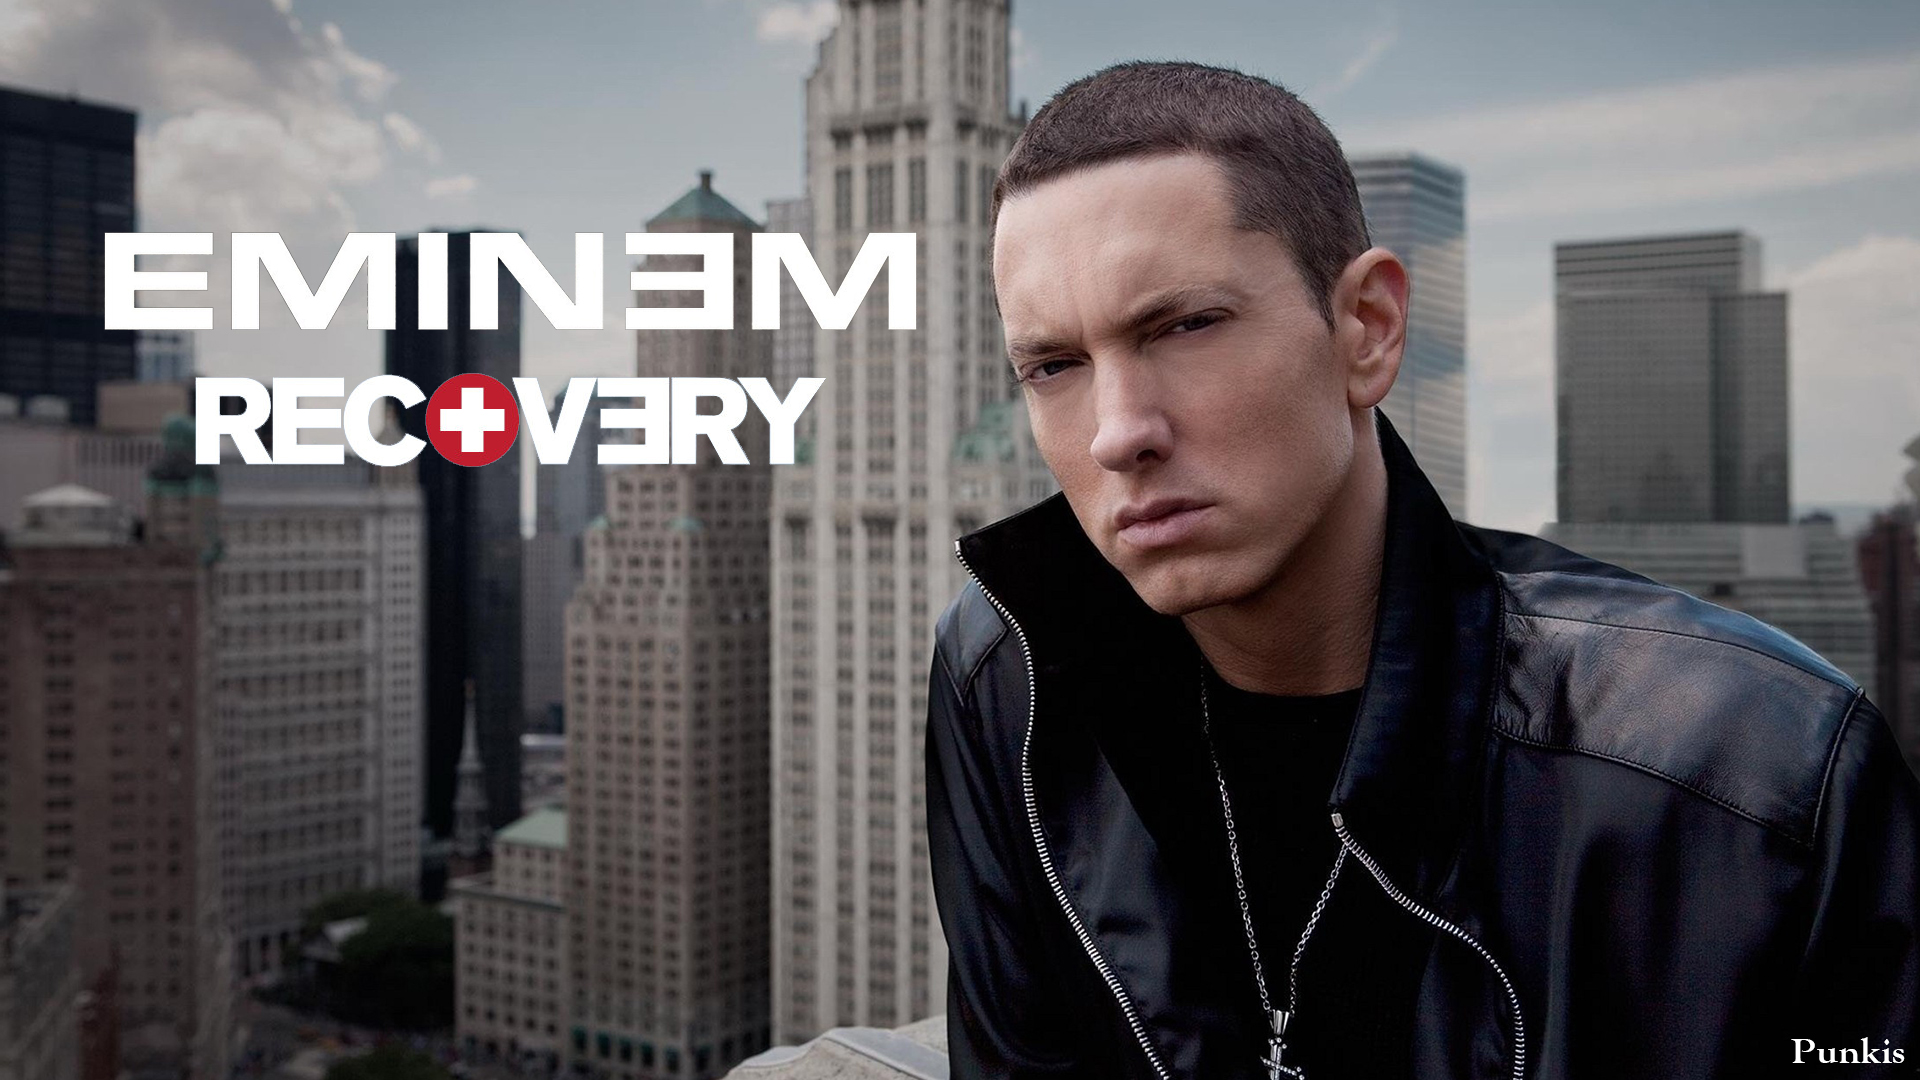 Eminem Recovery 1080p HD Wallpaper by ThePunkis23 on DeviantArt